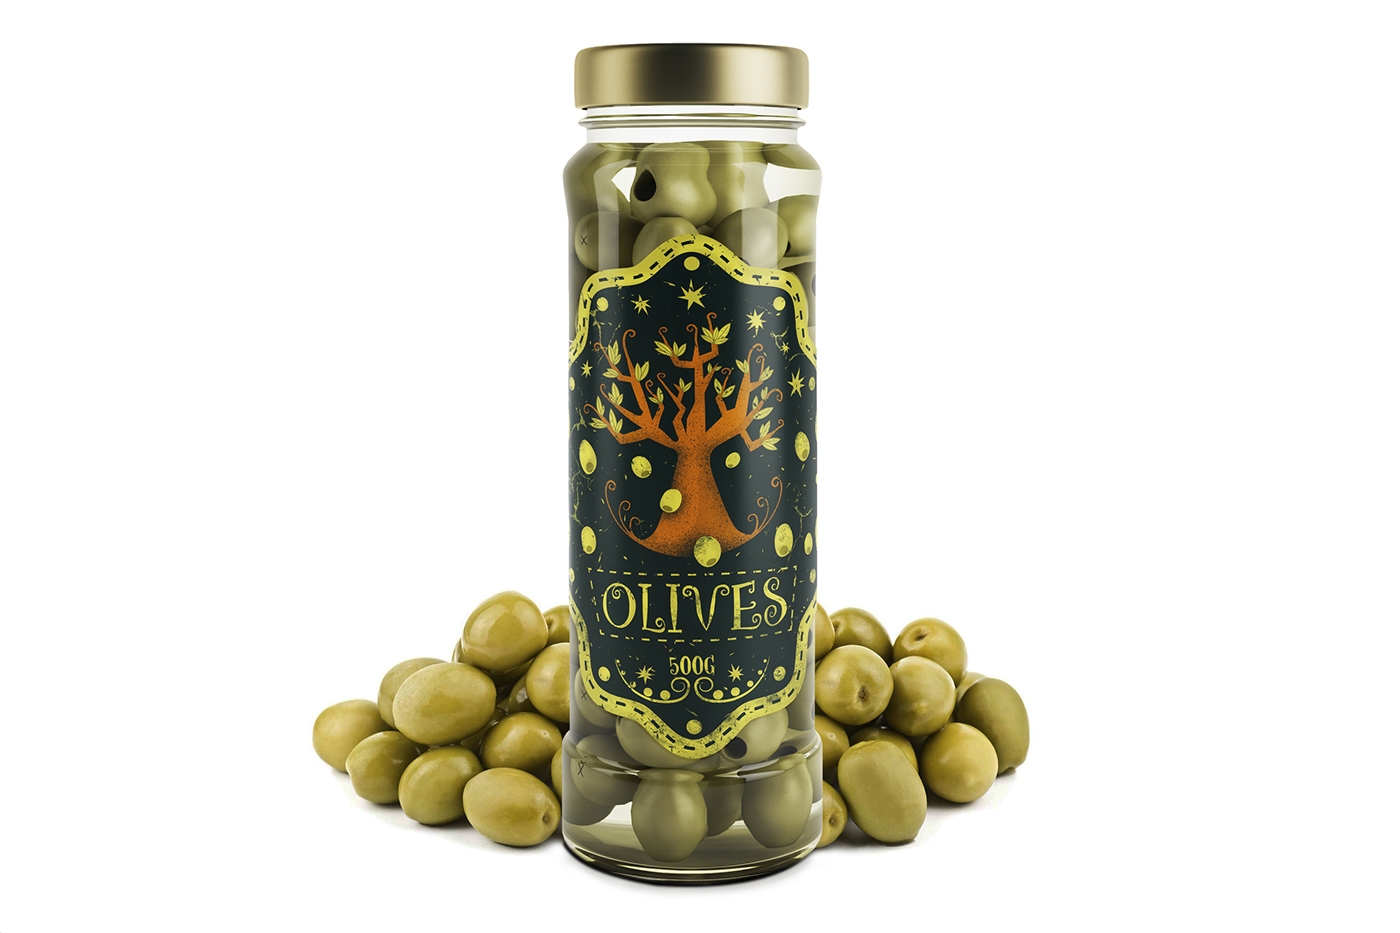 Packaging hot sauce olives skull labels products sauce jam cartoon